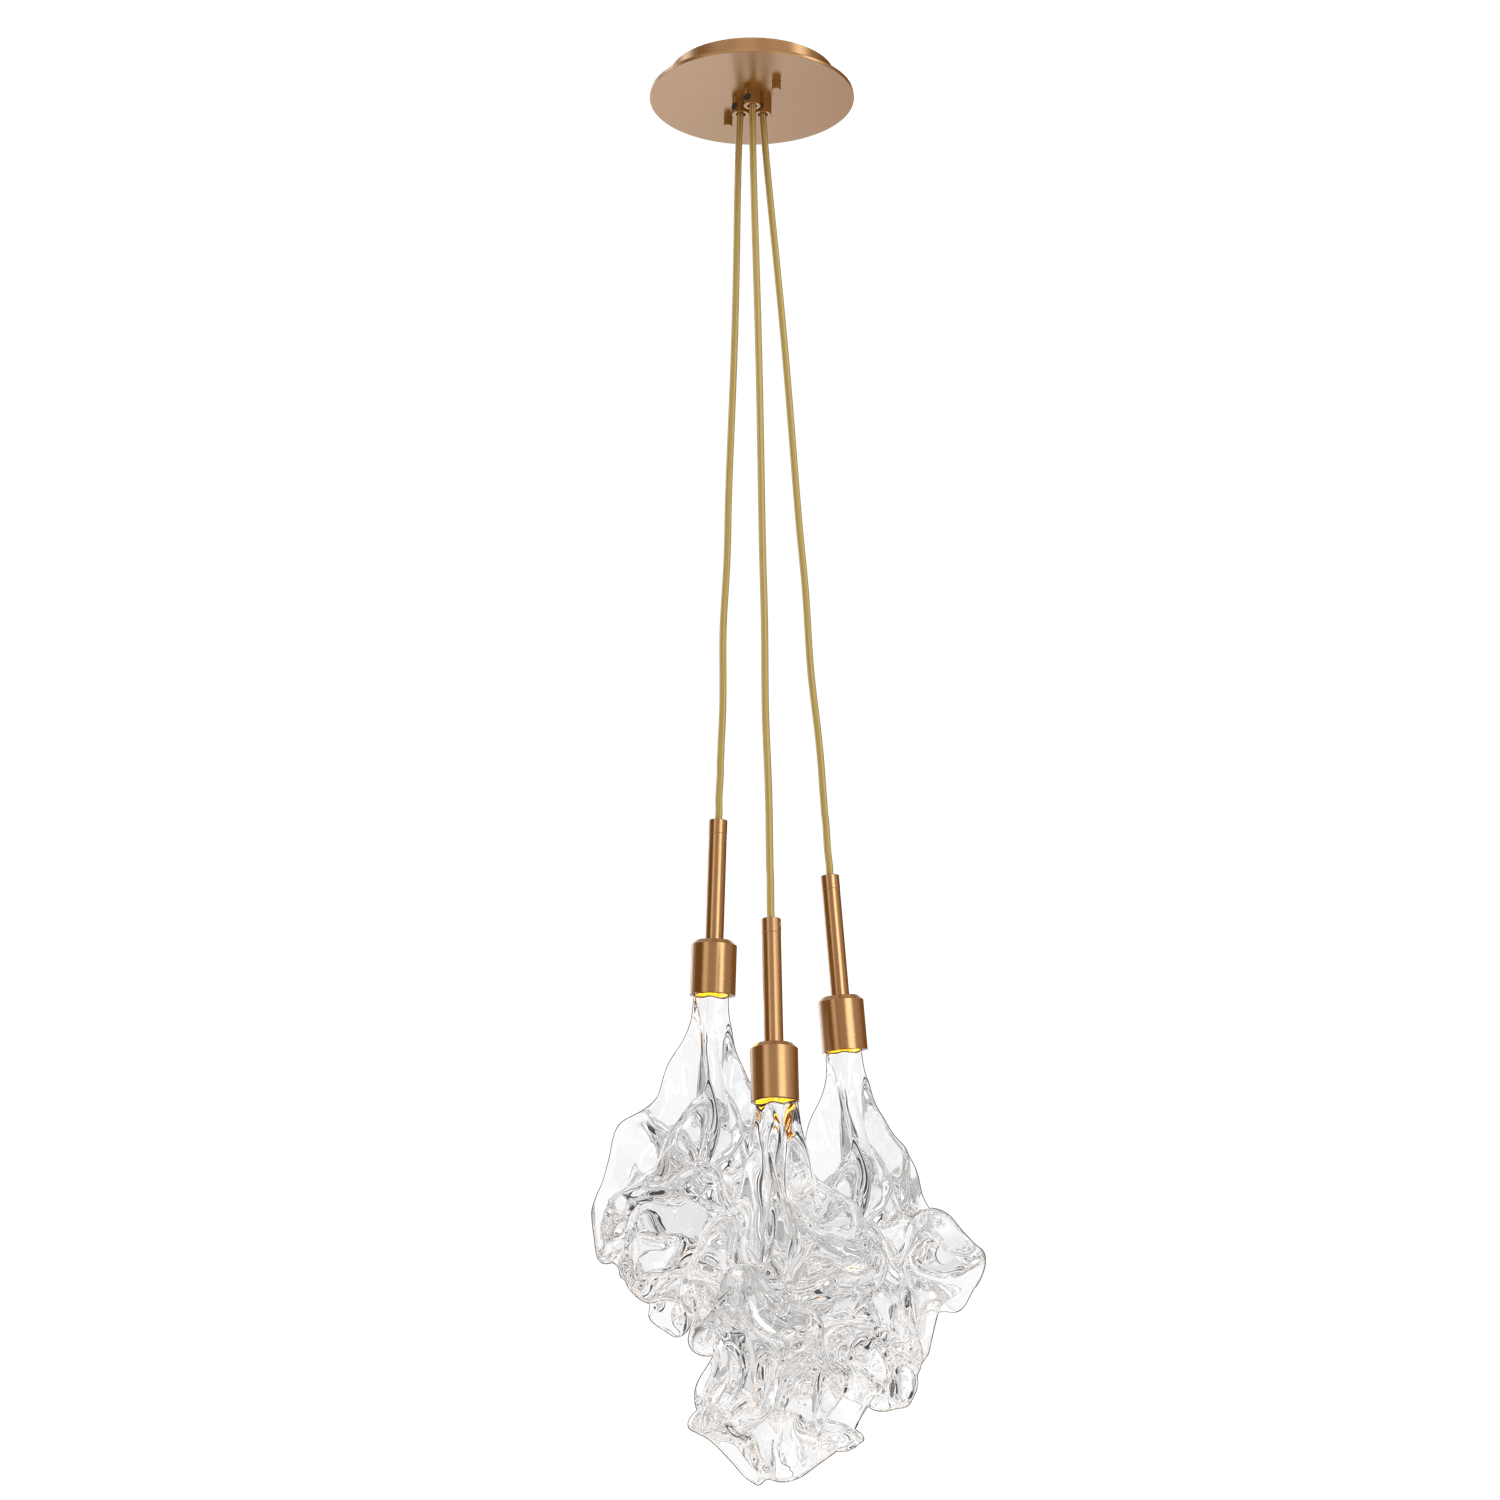 LAB0059-0A-NB-Hammerton-Studio-Blossom-3-light-cluster-pendant-light-with-novel-brass-finish-and-clear-handblown-crystal-glass-shades-and-LED-lamping